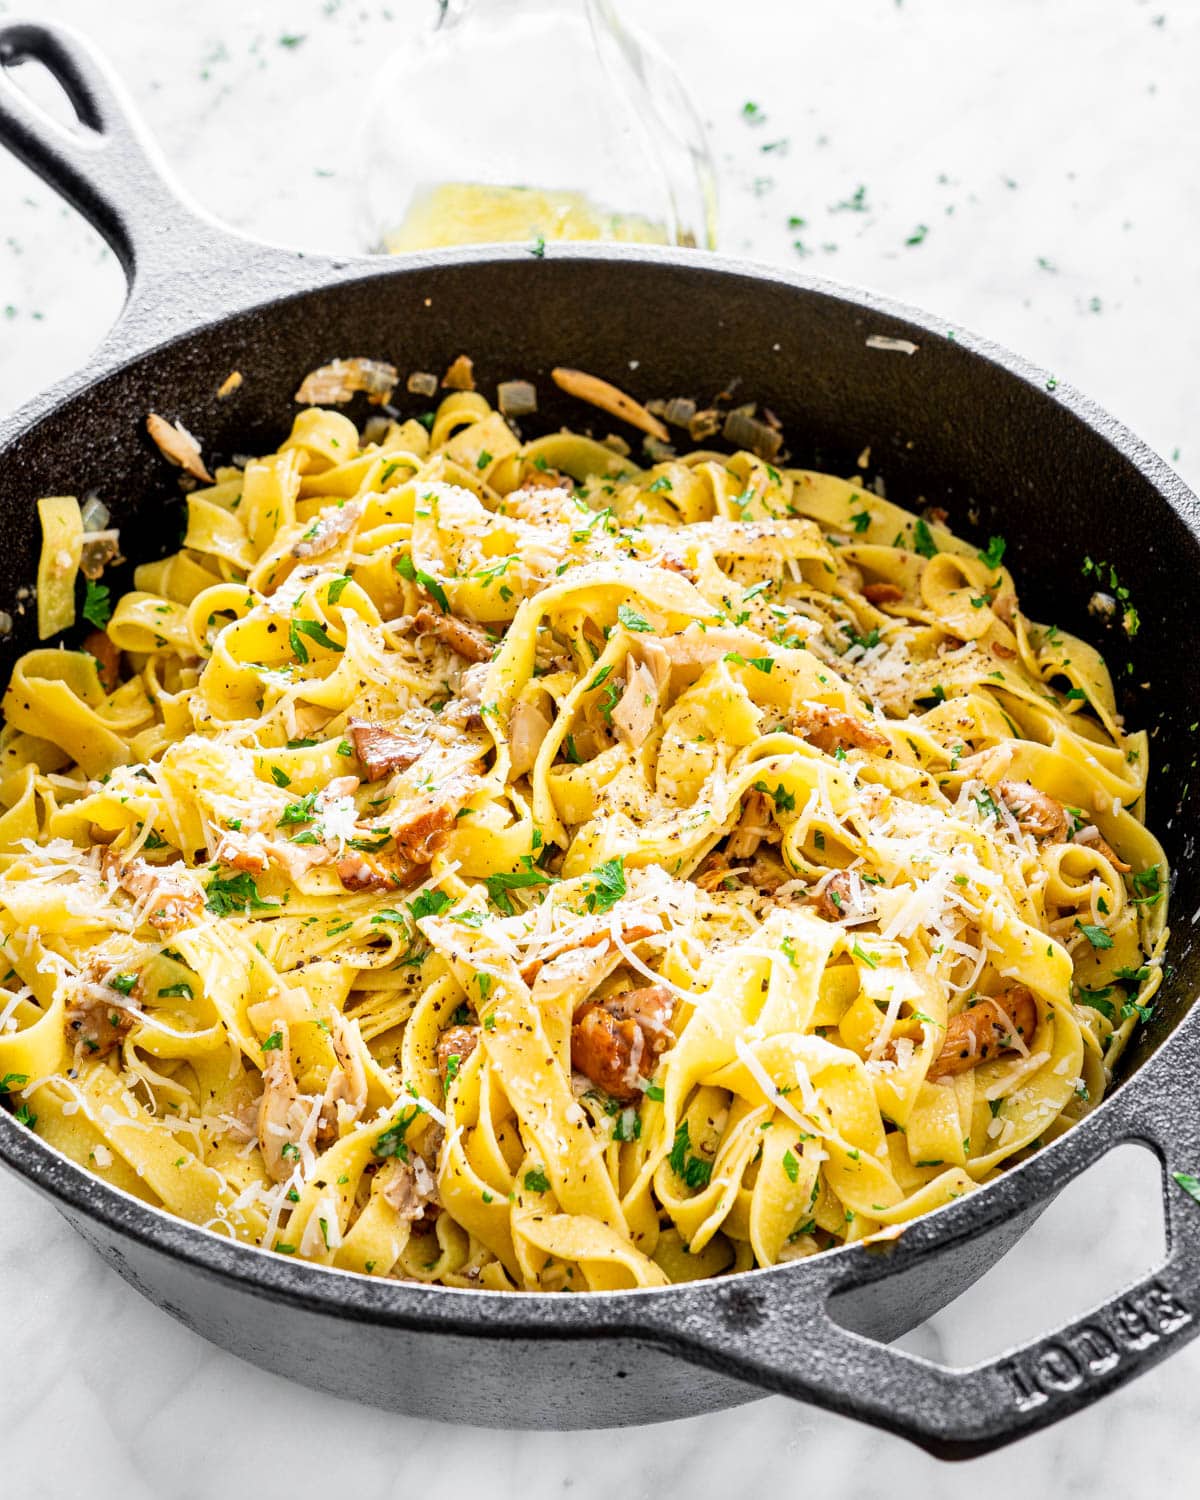 Chanterelle Mushrooms with Tagliatelle in a skillet